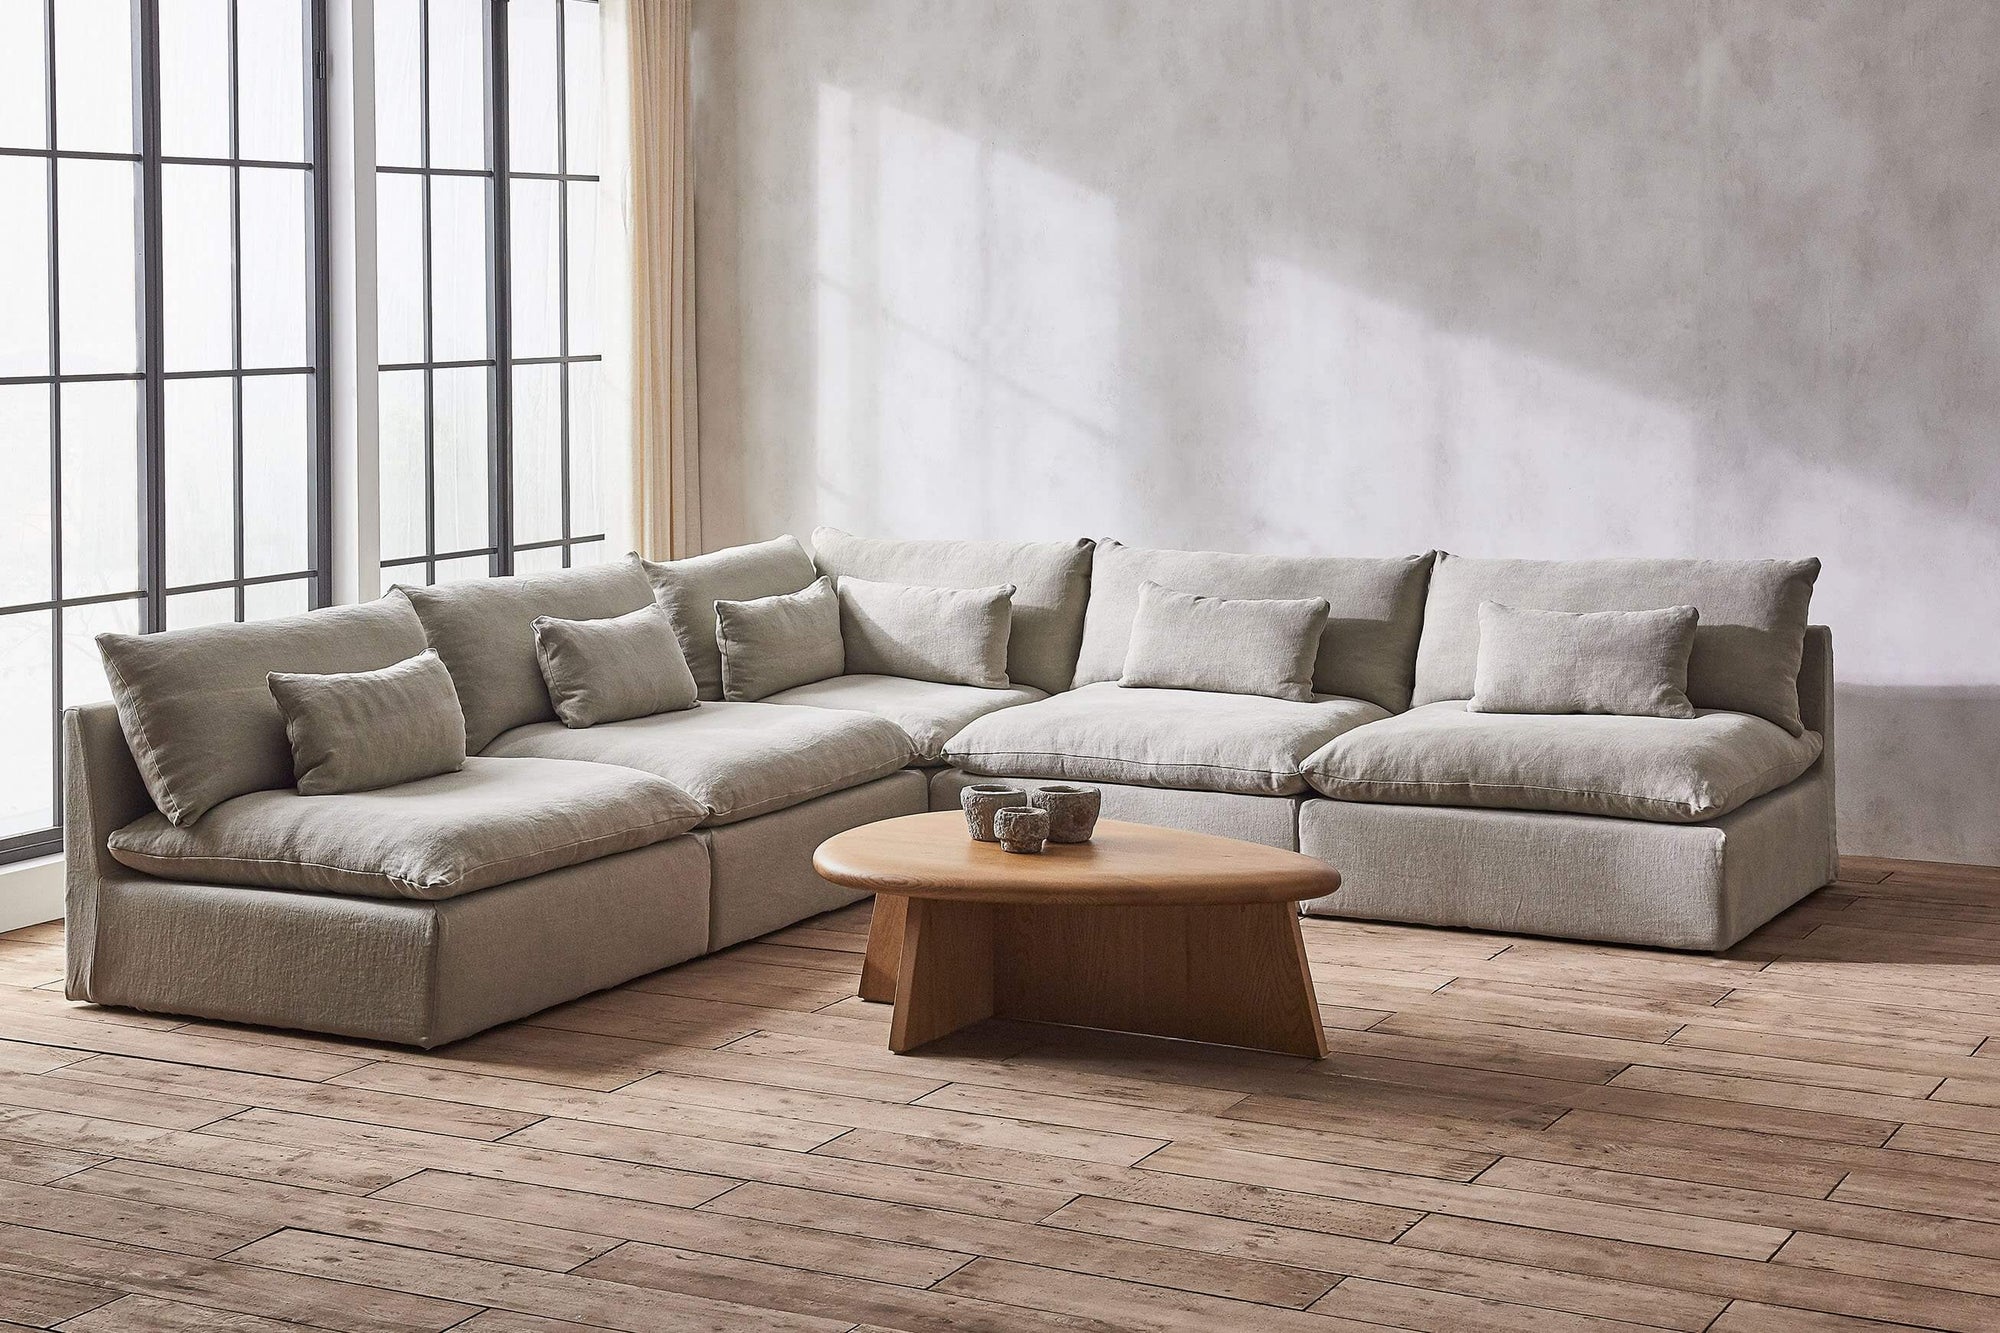 Aria Corner Sectional Sofa in Jasmine Rice, a light warm greige Medium Weight Linen, placed in a room with a decorrated Amina Coffee Table